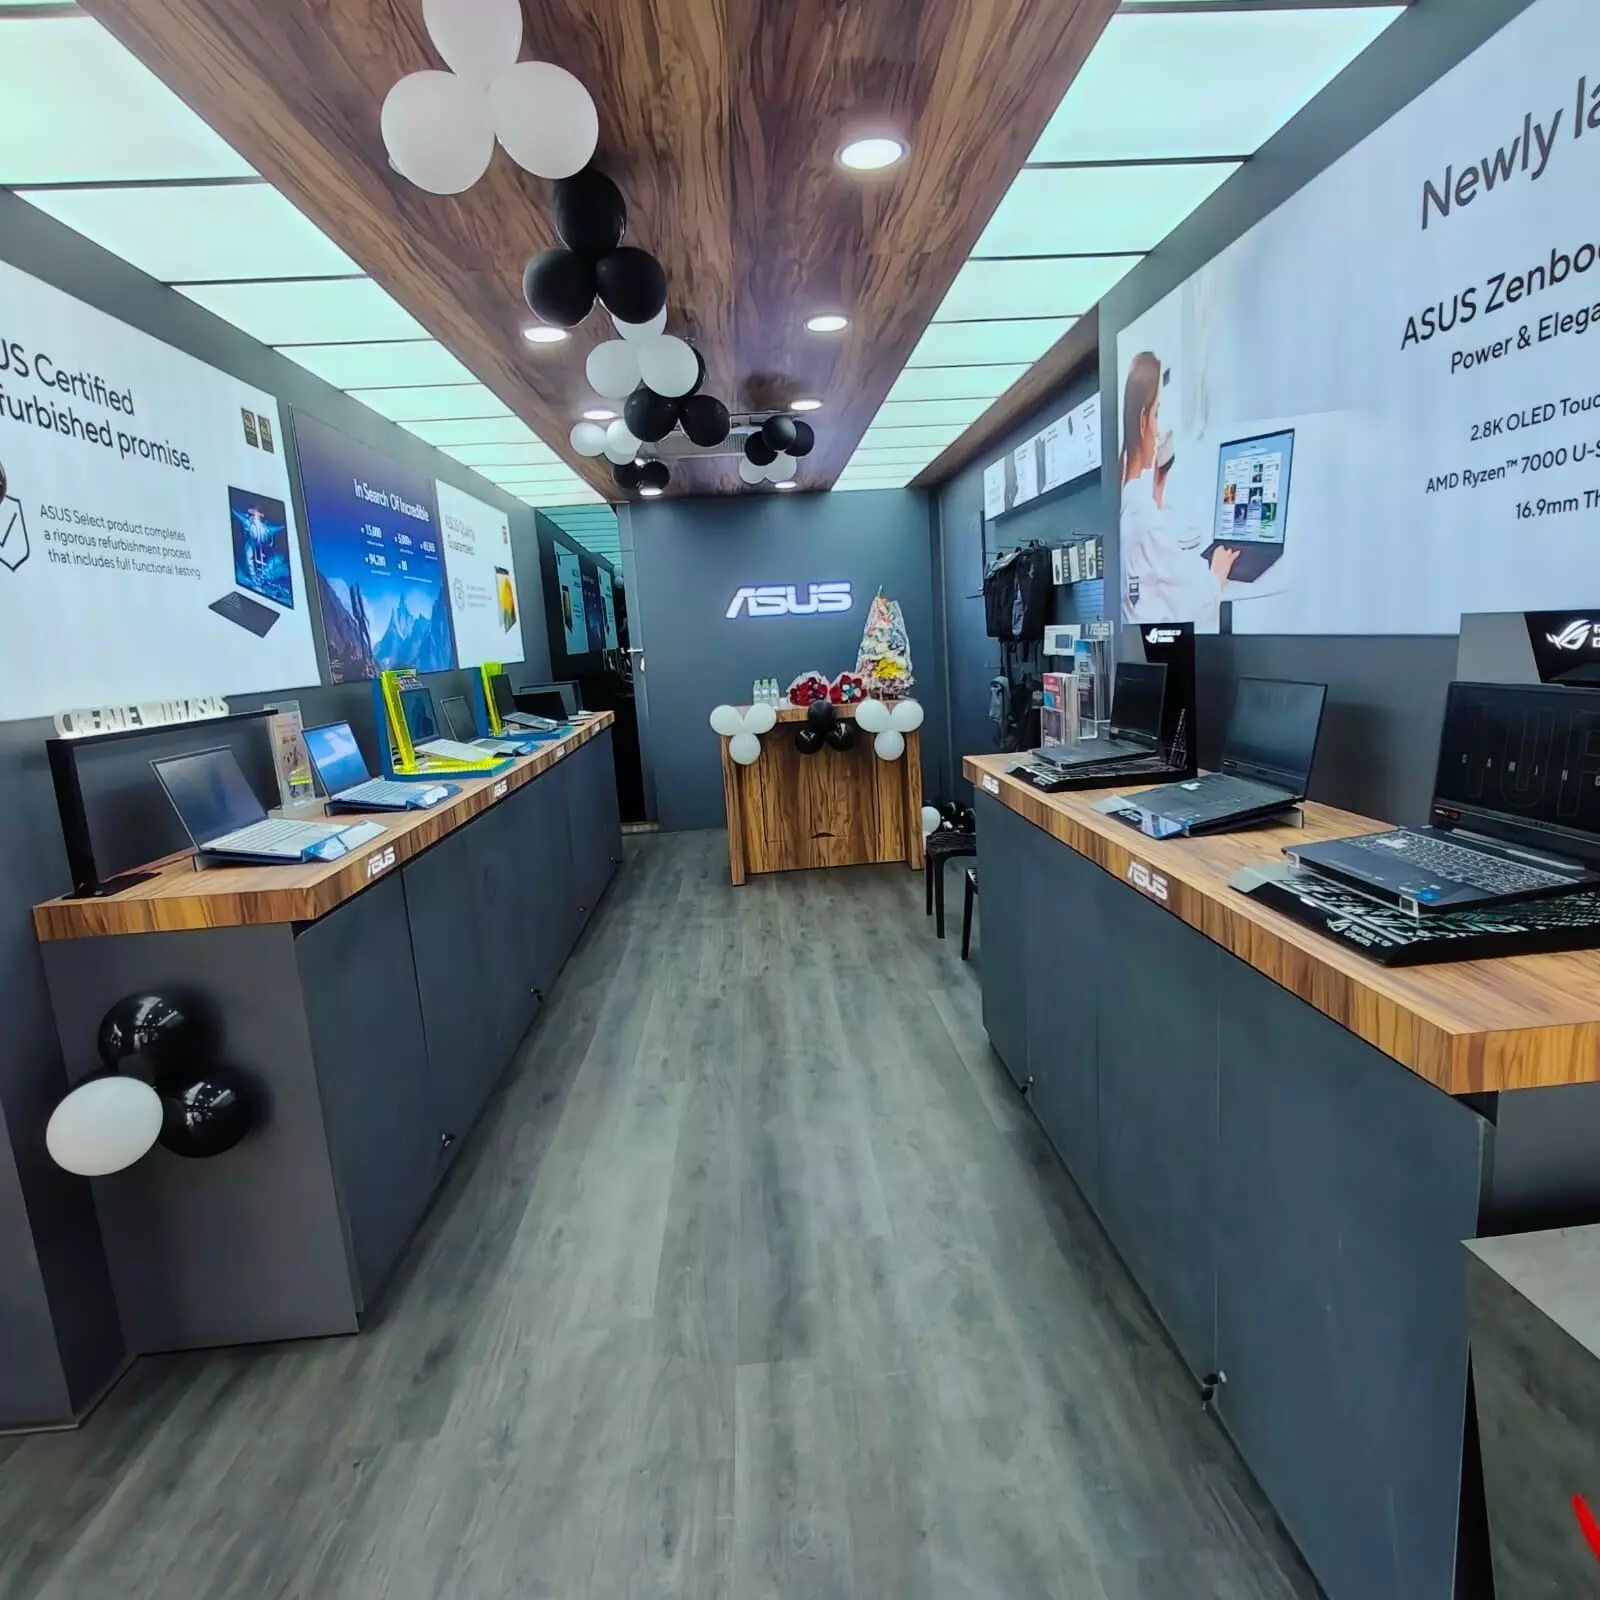 ASUS strengthens presence in Hyd, India with new Select Store concept